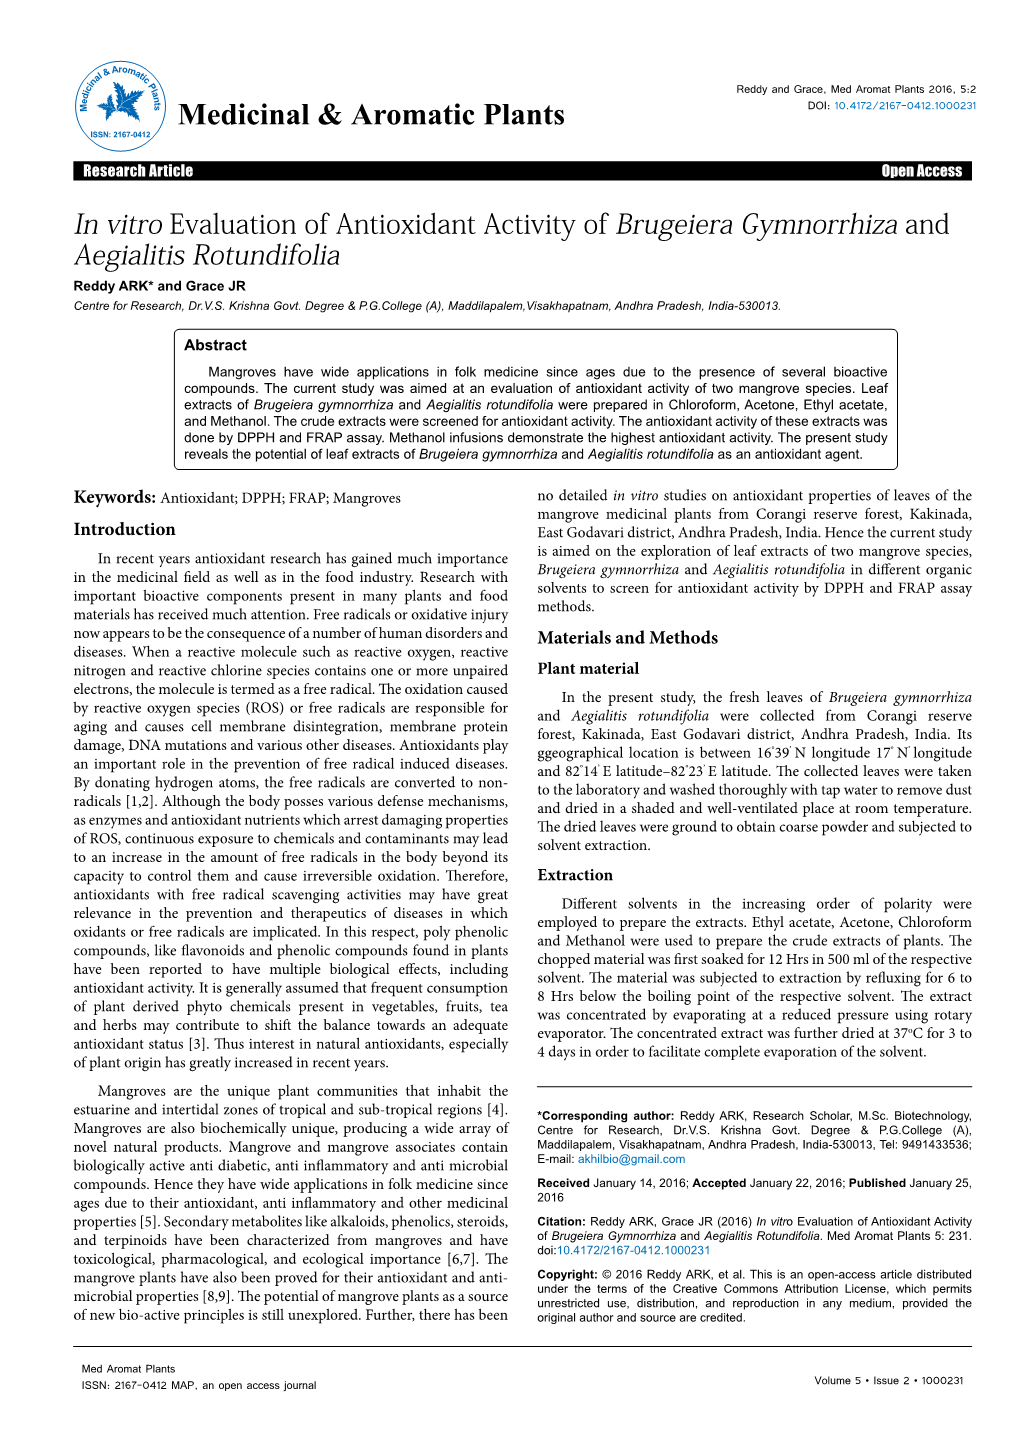 In Vitro Evaluation of Antioxidant Activity of Brugeiera Gymnorrhiza and Aegialitis Rotundifolia Reddy ARK* and Grace JR Centre for Research, Dr.V.S